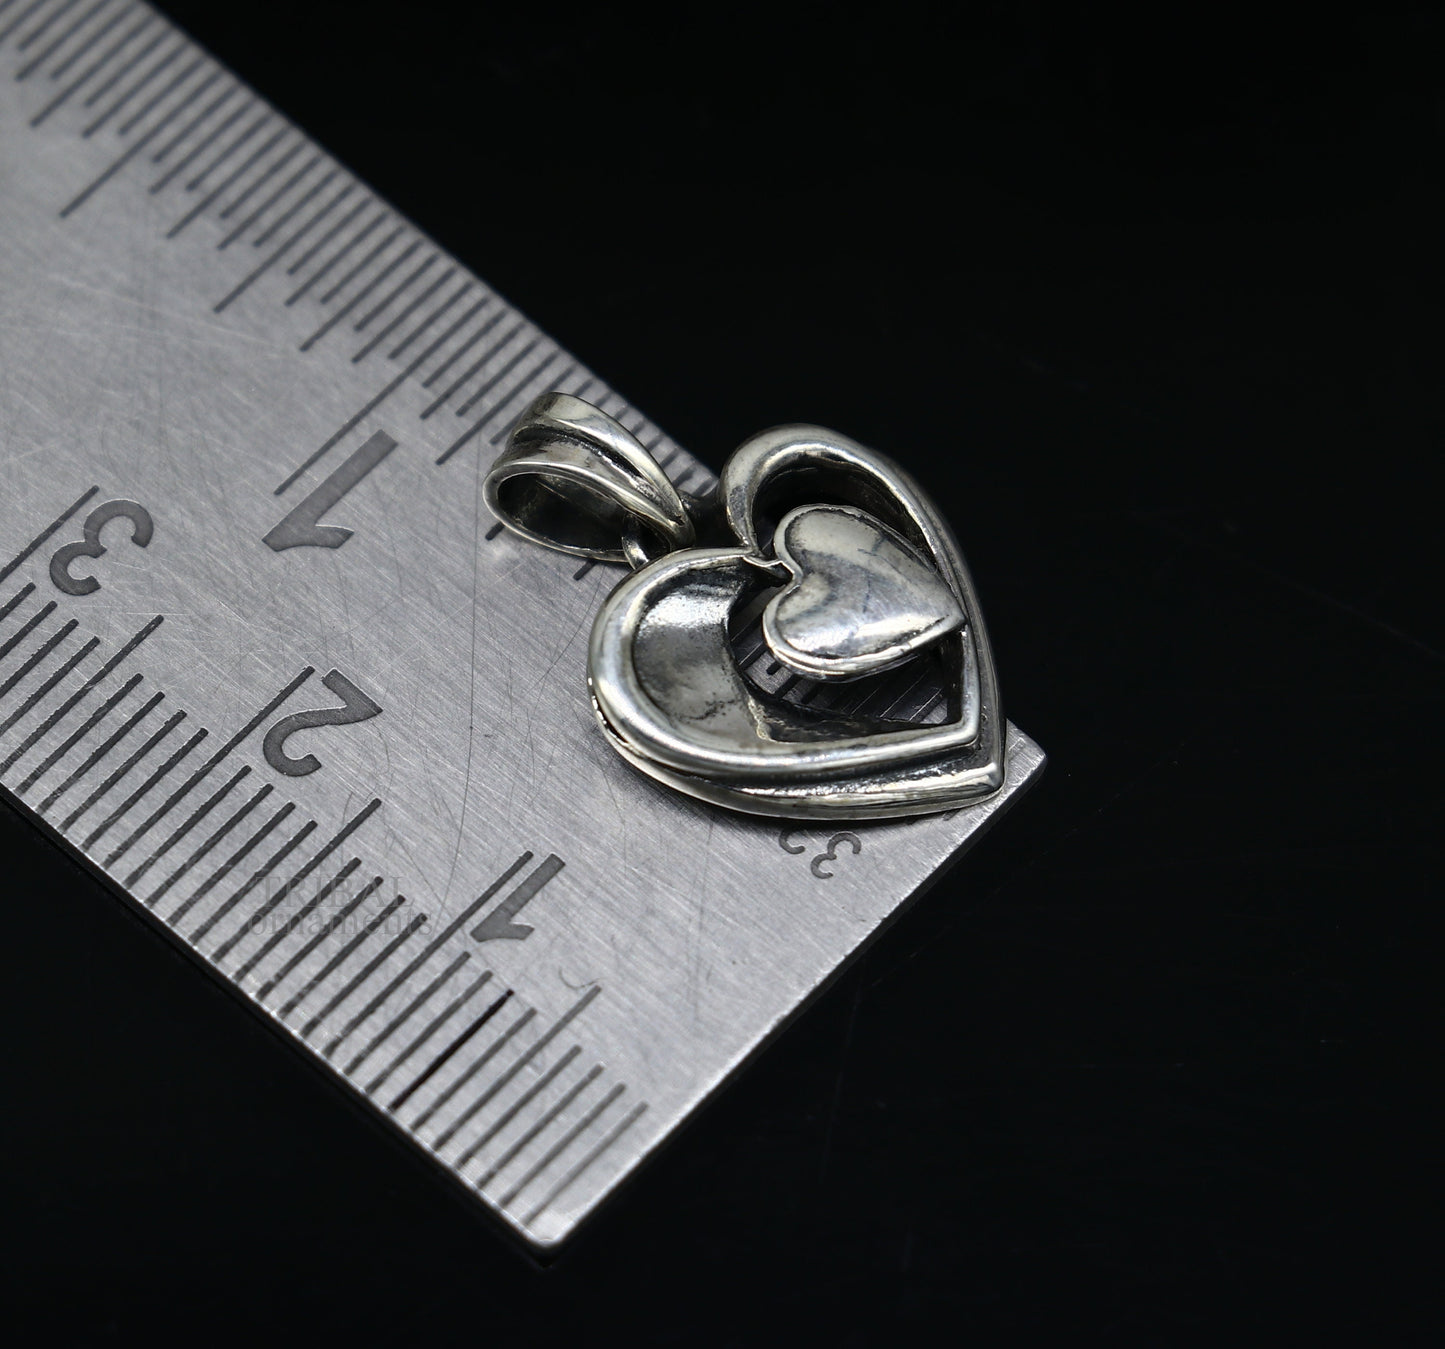 Exclusive design solid 925 sterling silver heart pendant, excellent unique design stylish unisex personalized gift pendant jewelry ssp1433 - TRIBAL ORNAMENTS